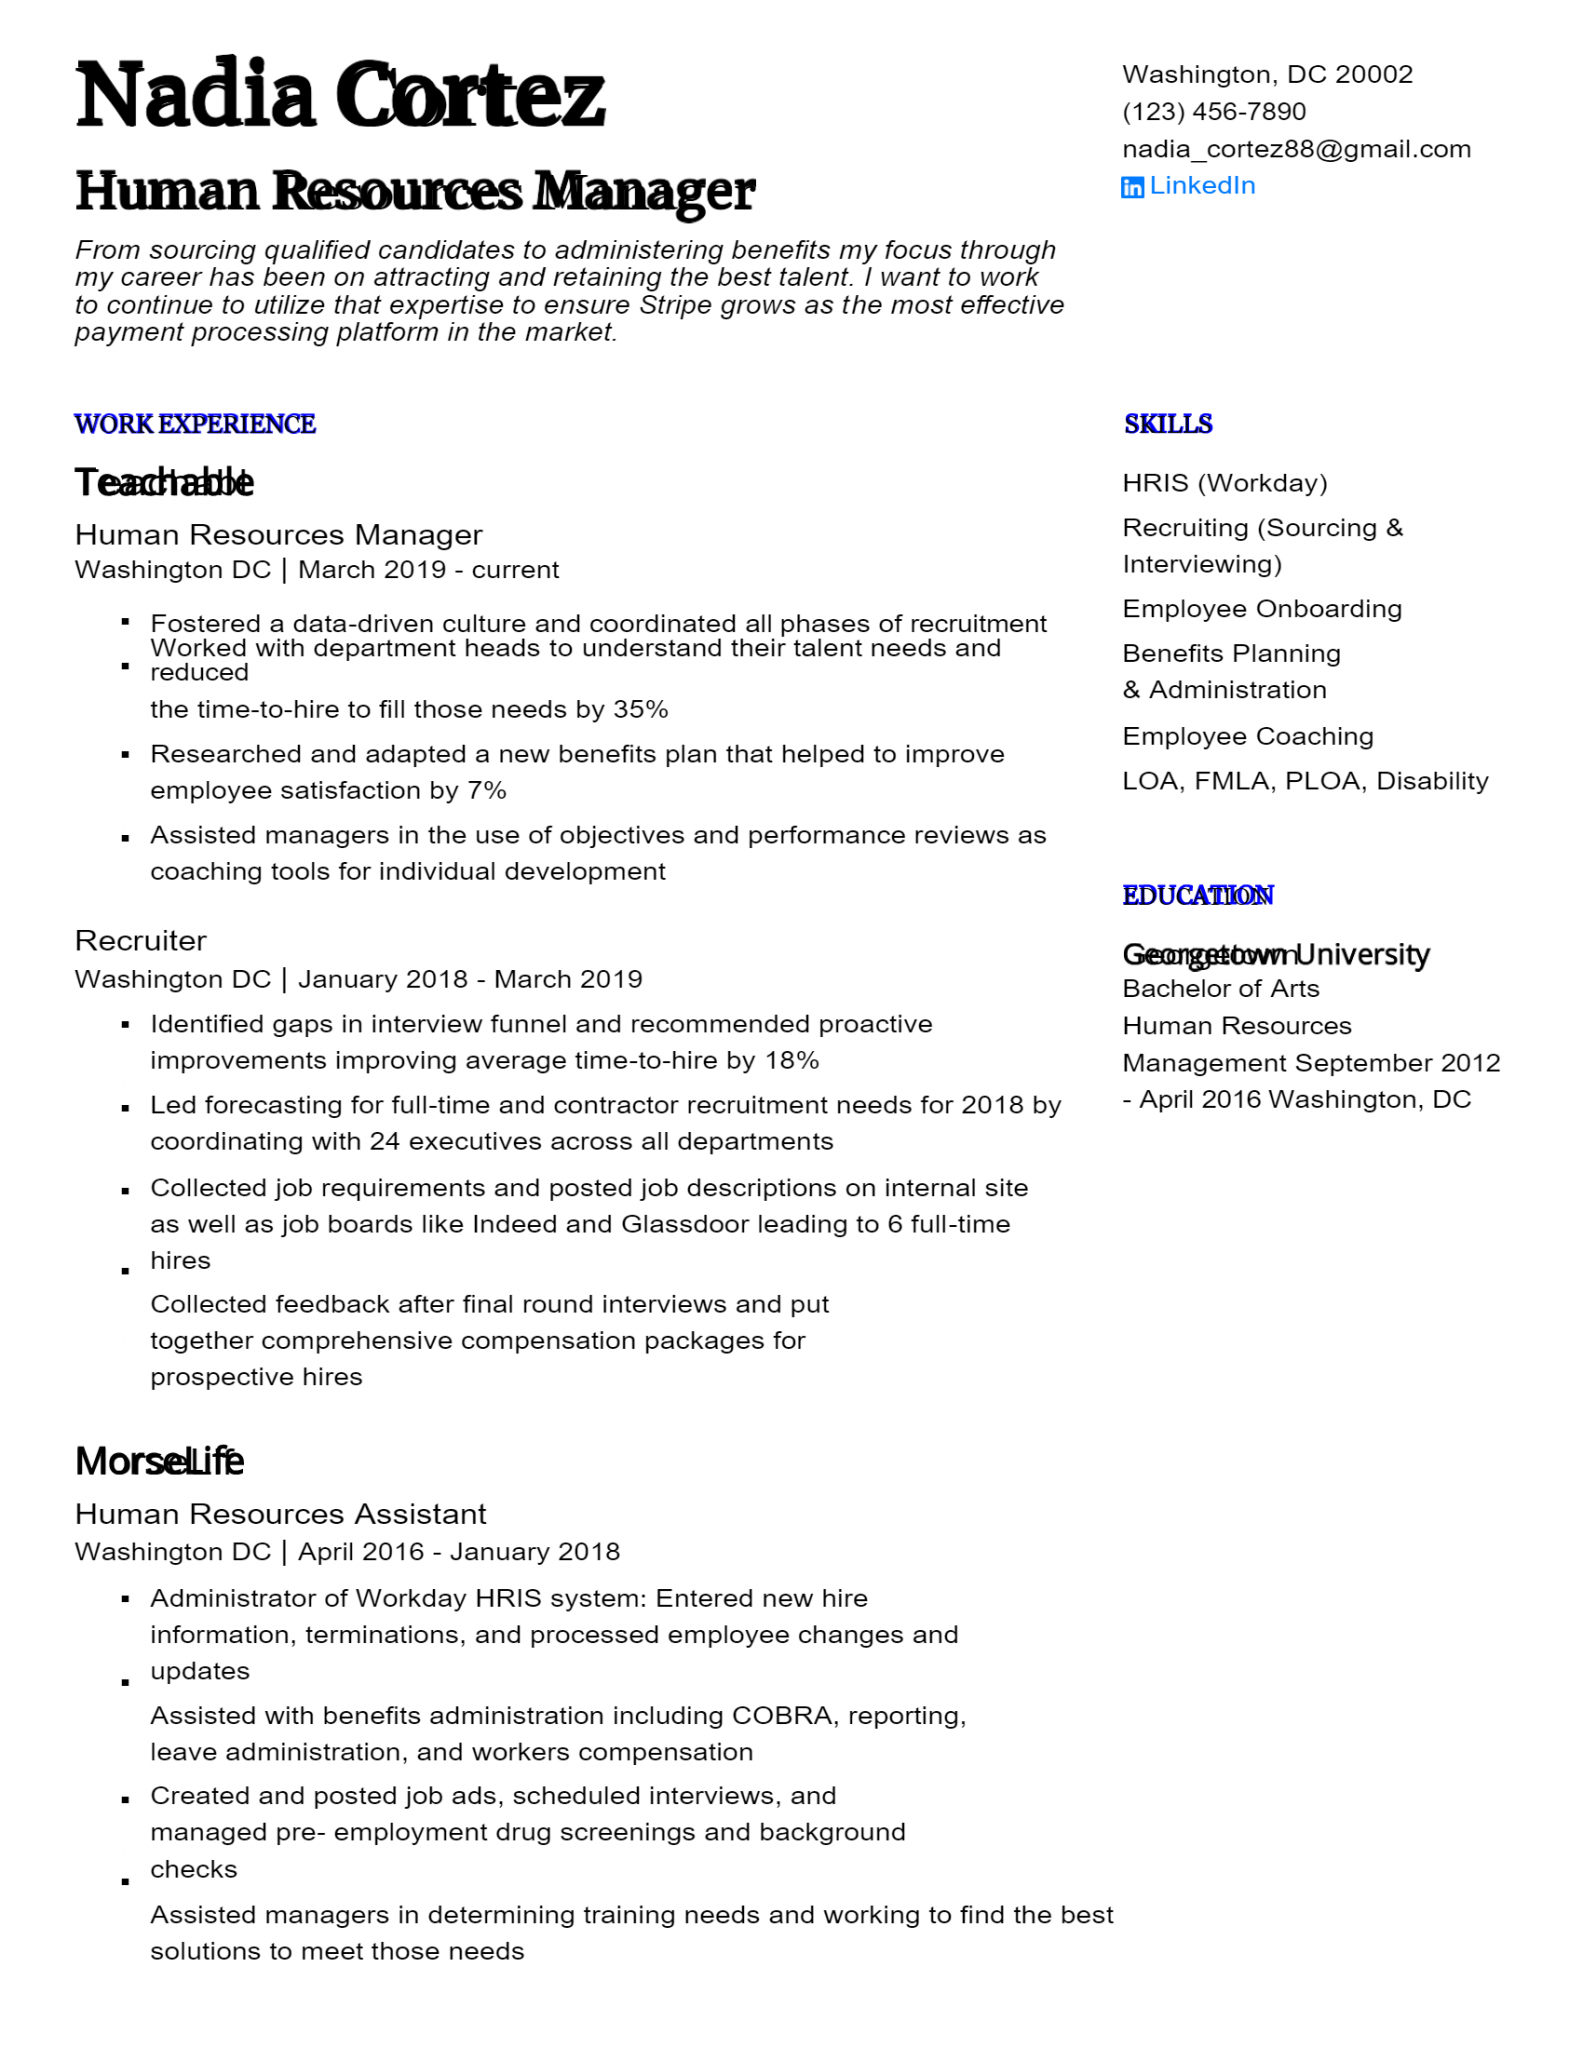 human resources manager resume profile